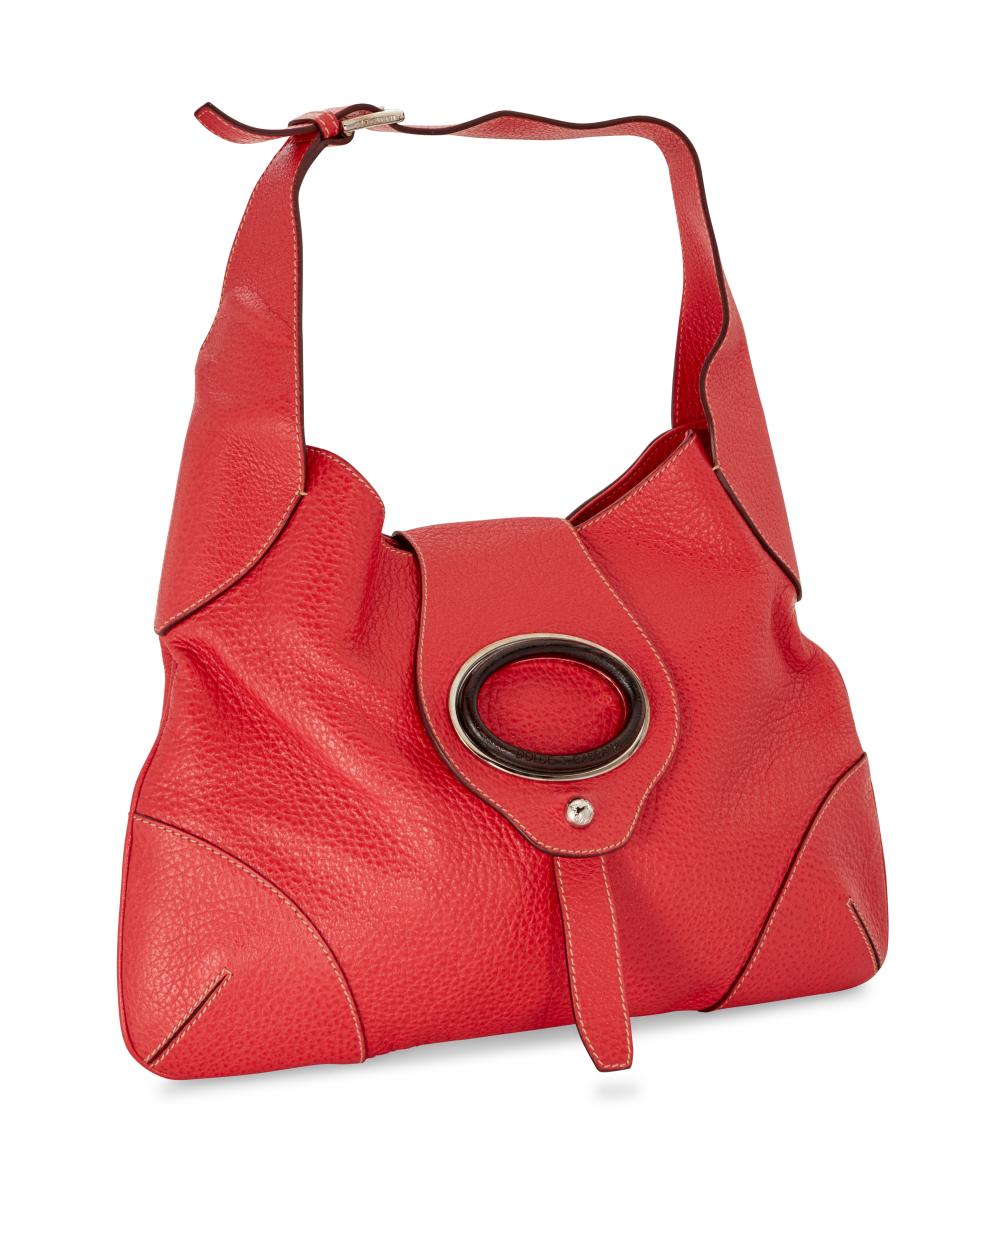 A DOLCE GABBANA RED LEATHER HOBO 343651